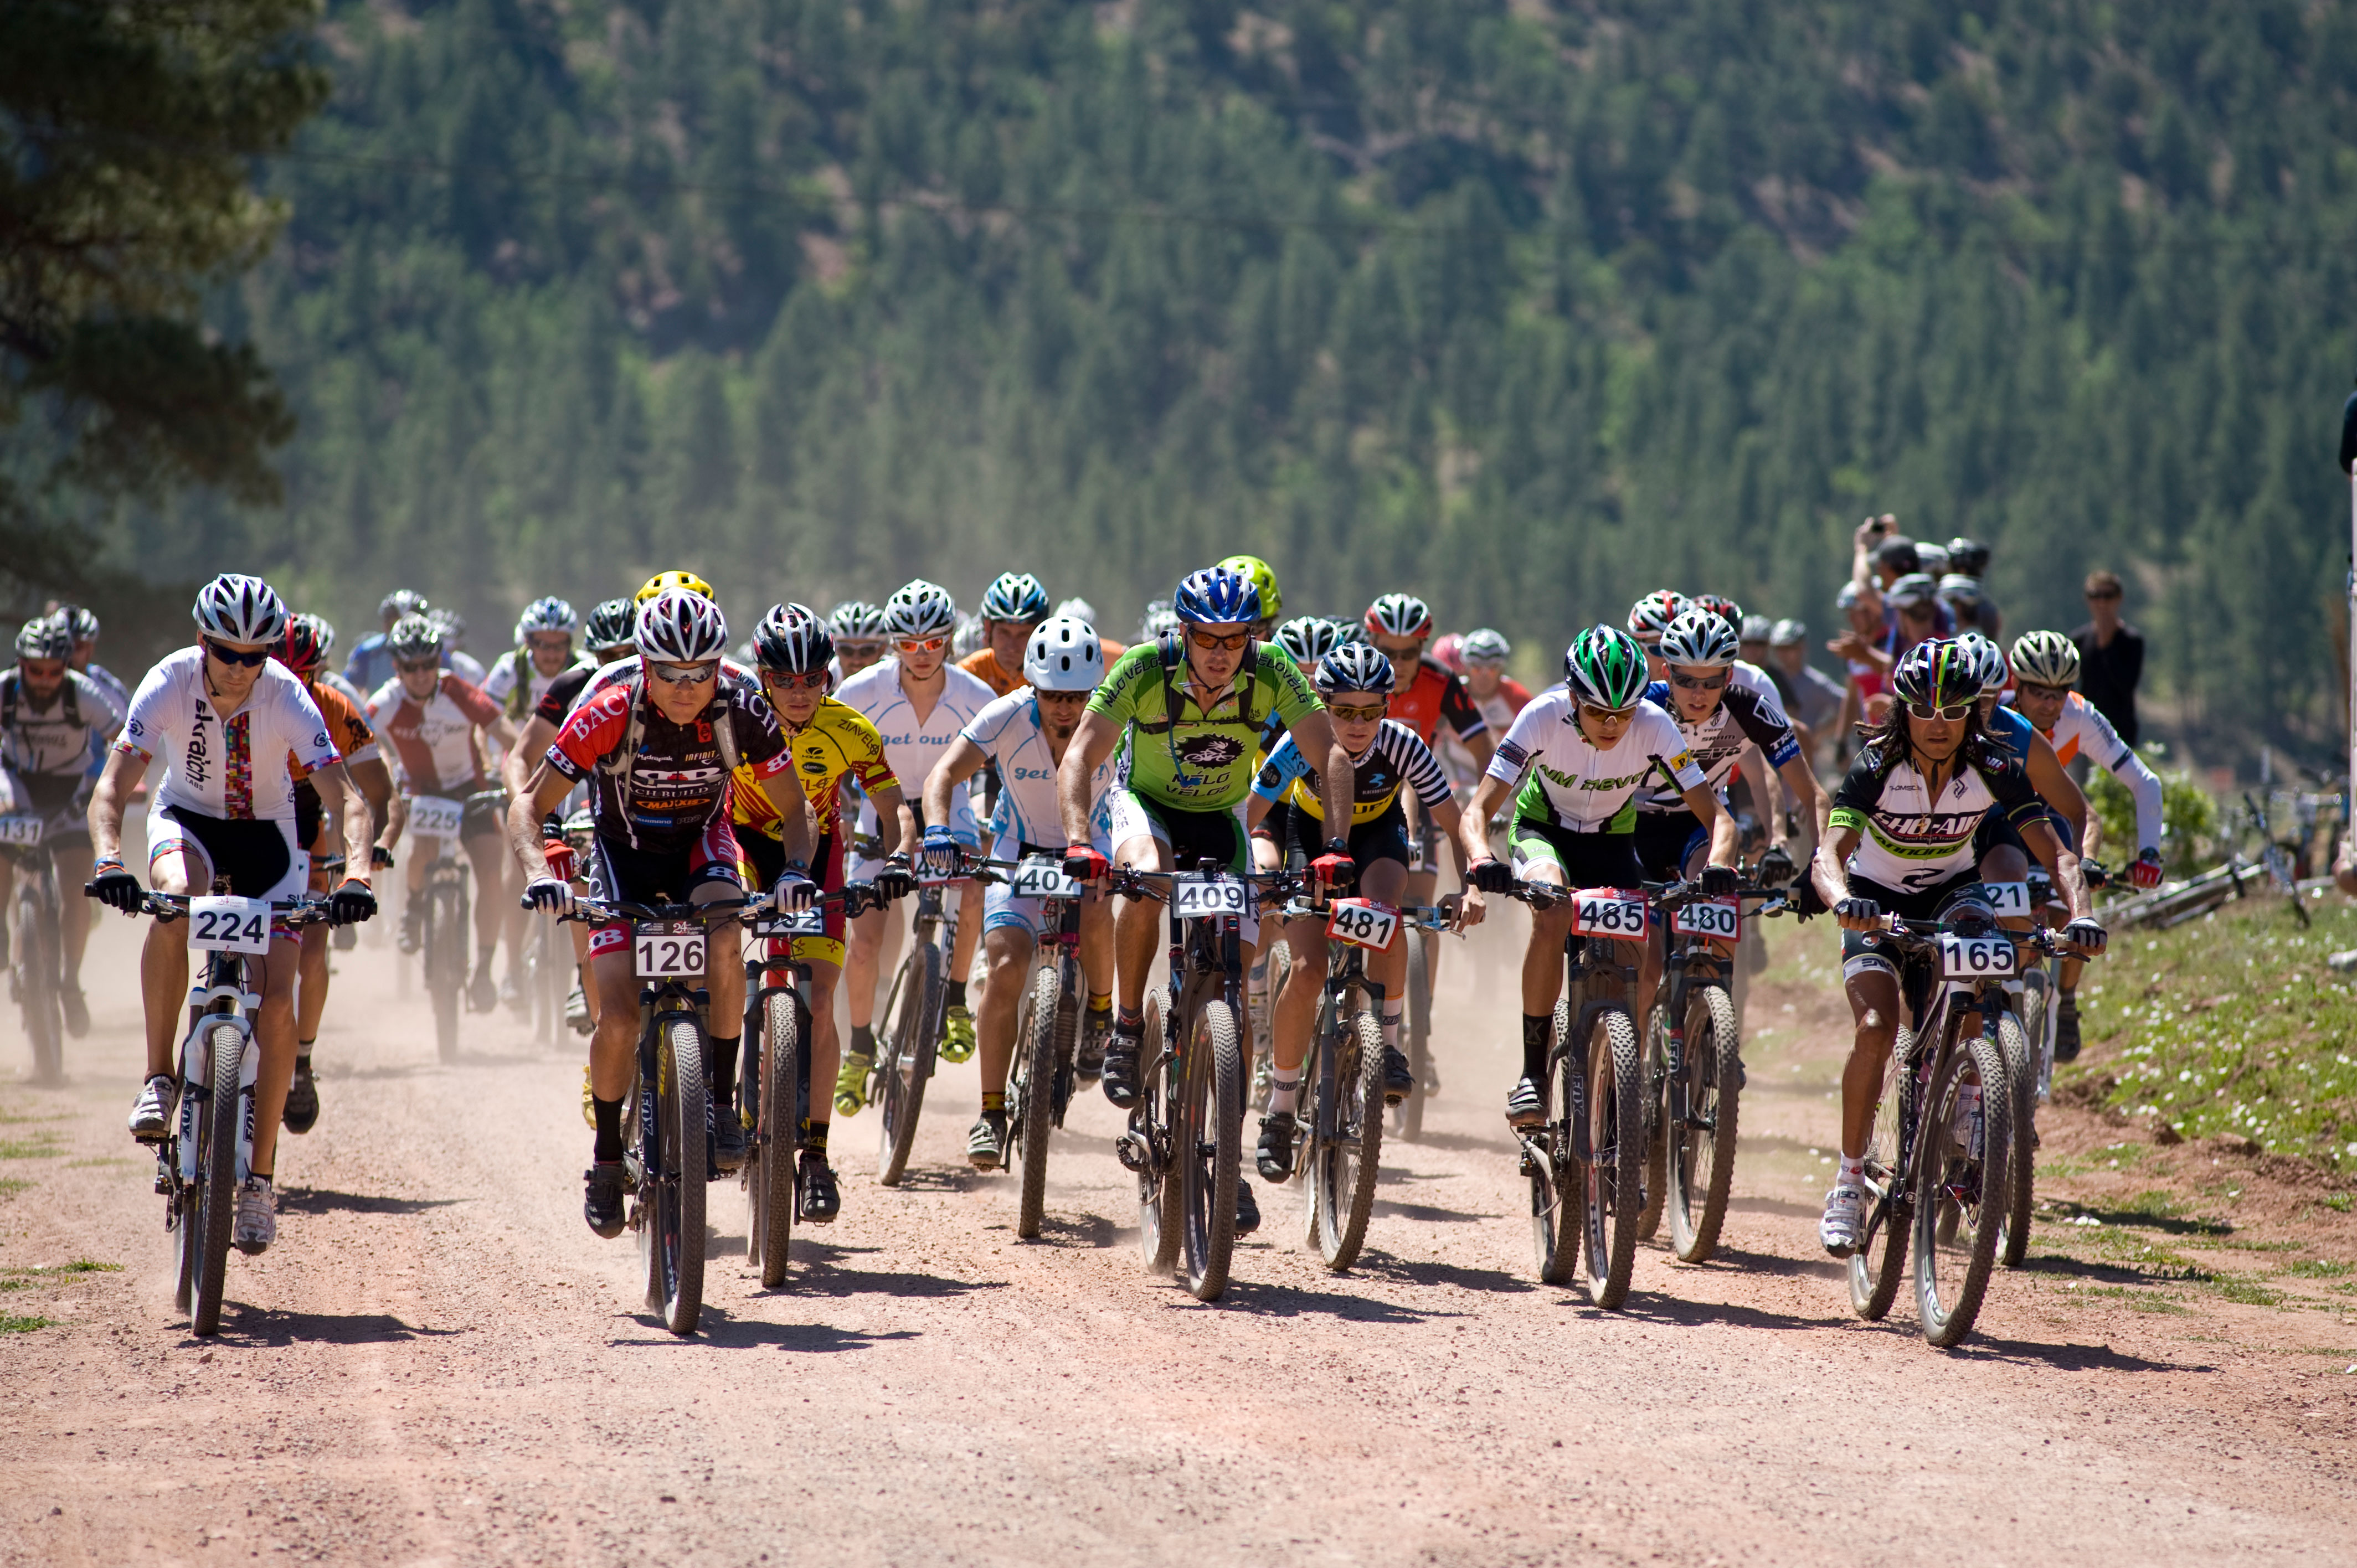 The 24 Hours in the Enchanted Forest bike race